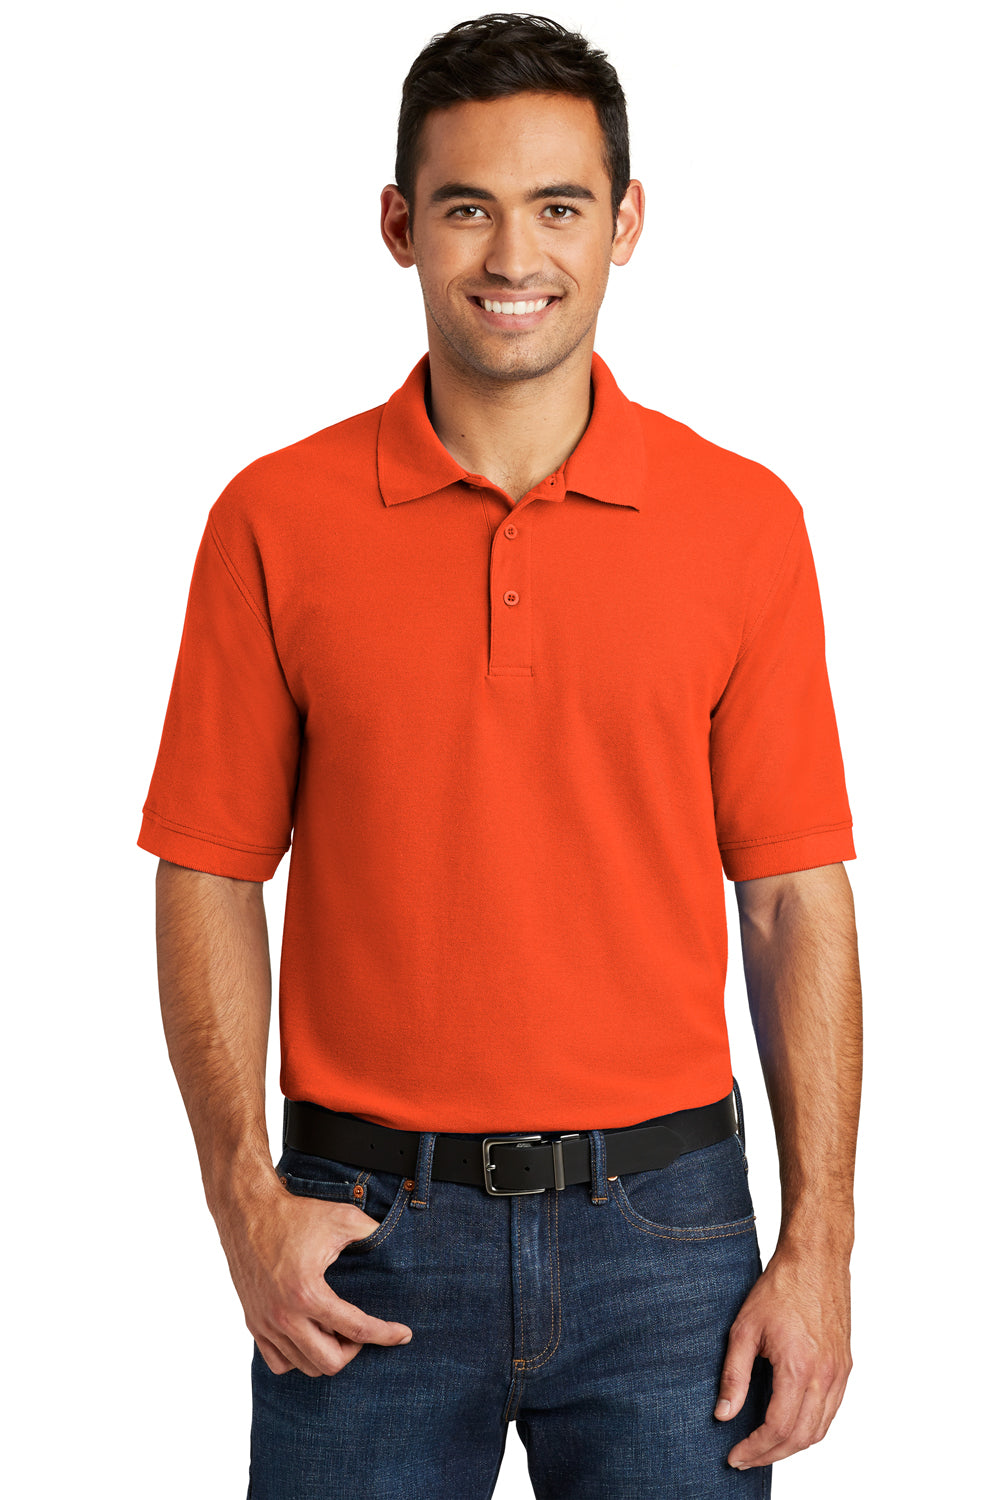 Port & Company KP155 Mens Core Stain Resistant Short Sleeve Polo Shirt Orange Front